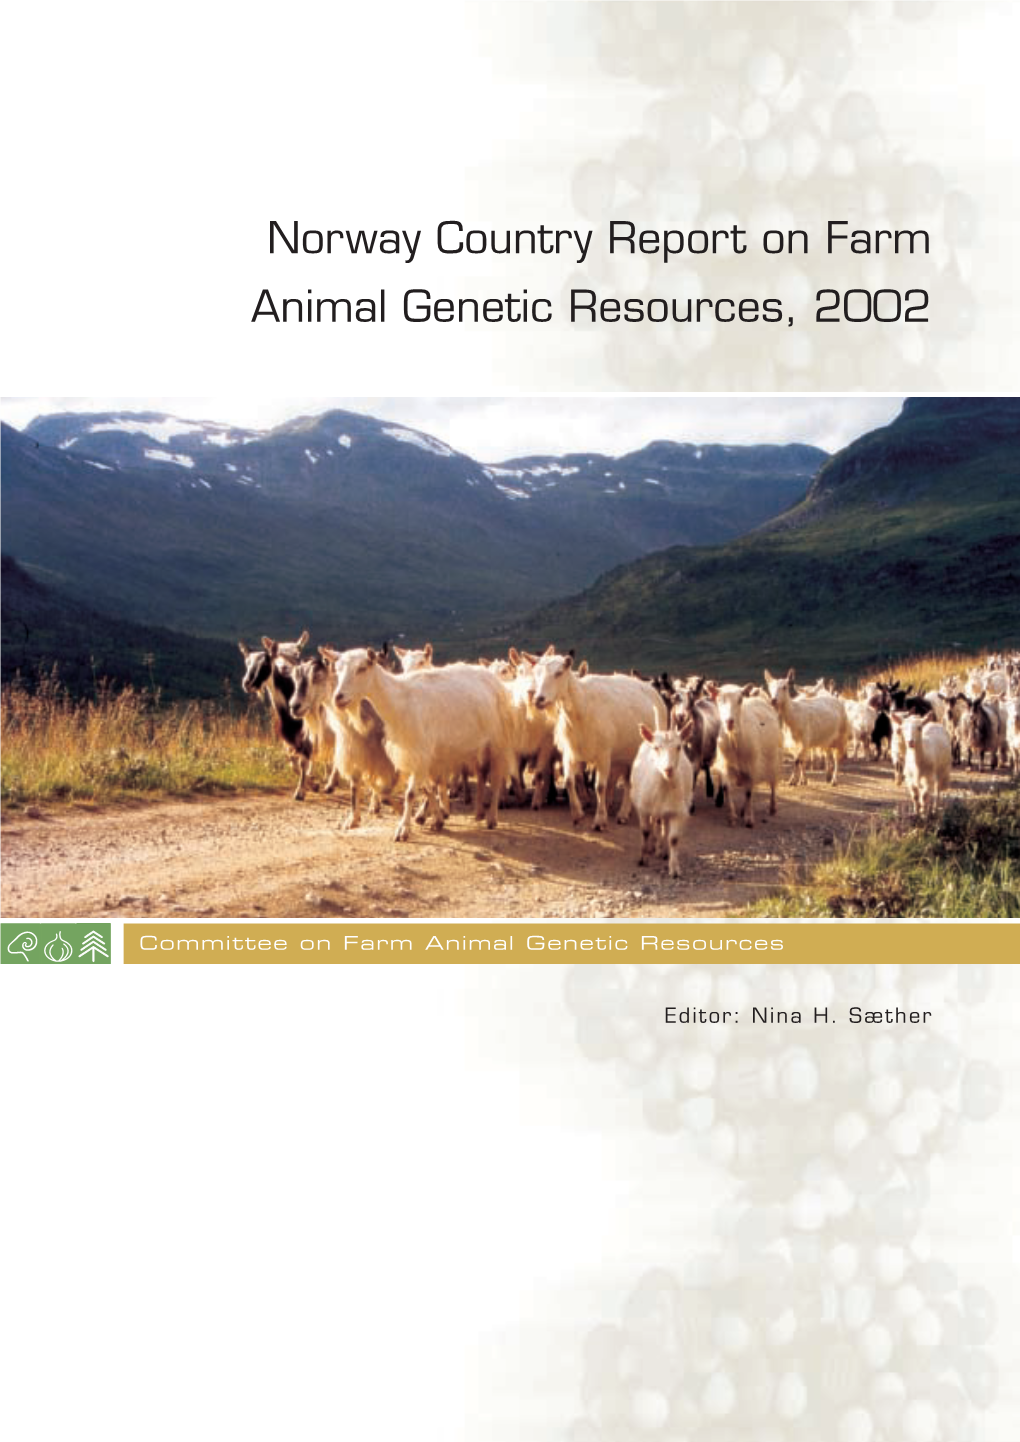 Norway Country Report on Farm Animal Genetic Resources, 2002